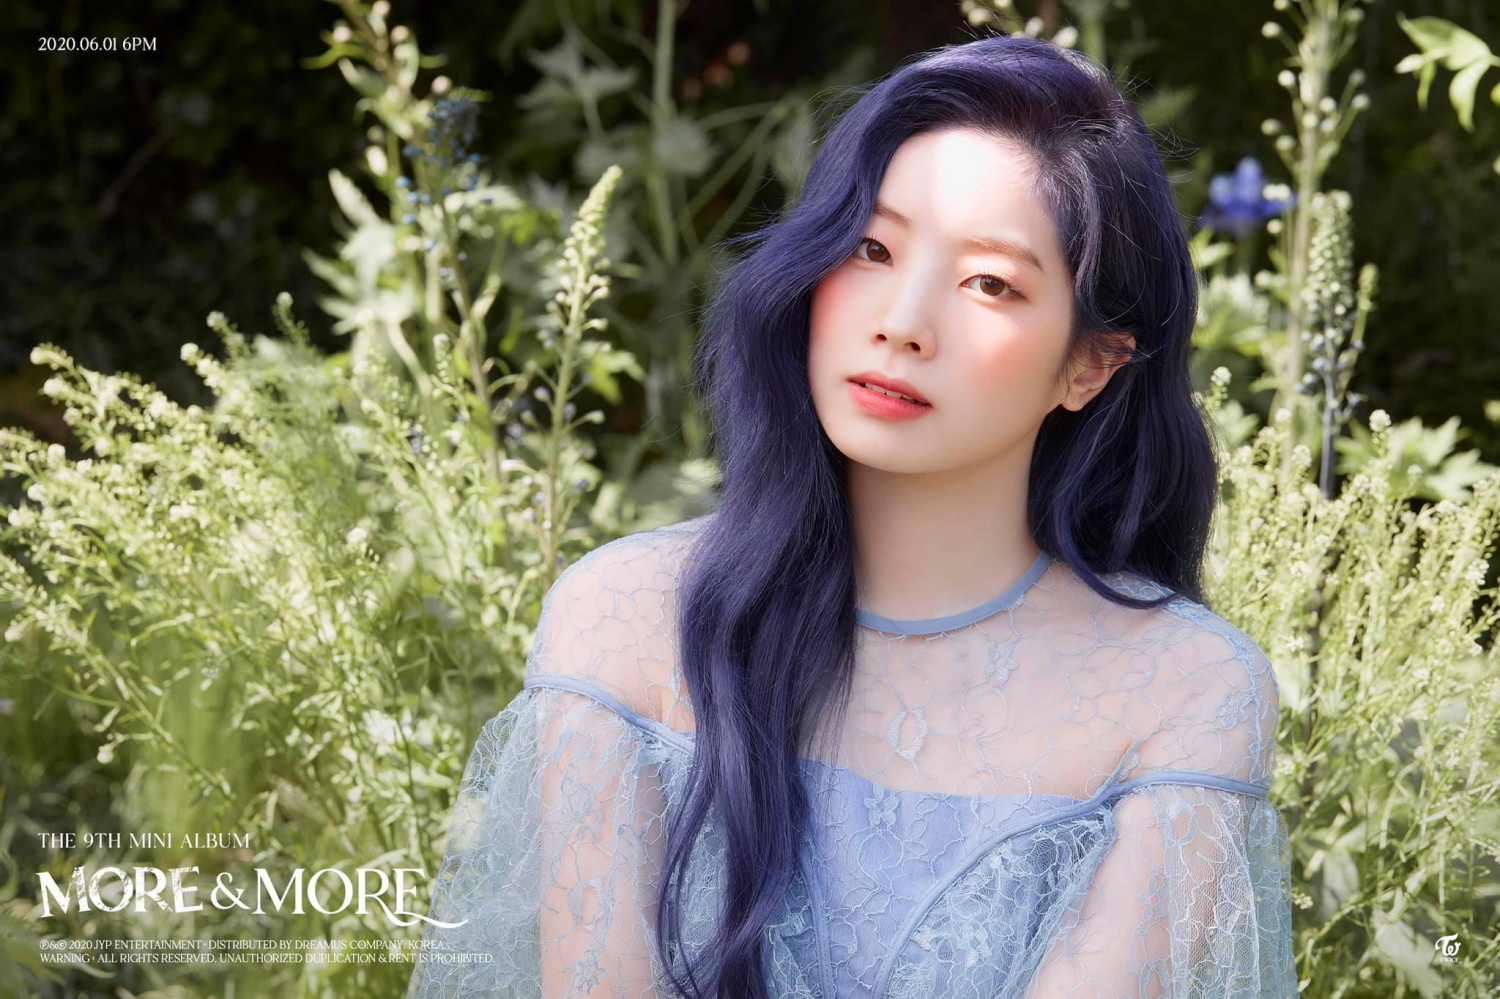 TWICE Dahyun Displays Breathtaking Visual and Blue Hair in "MORE & MORE" Teaser